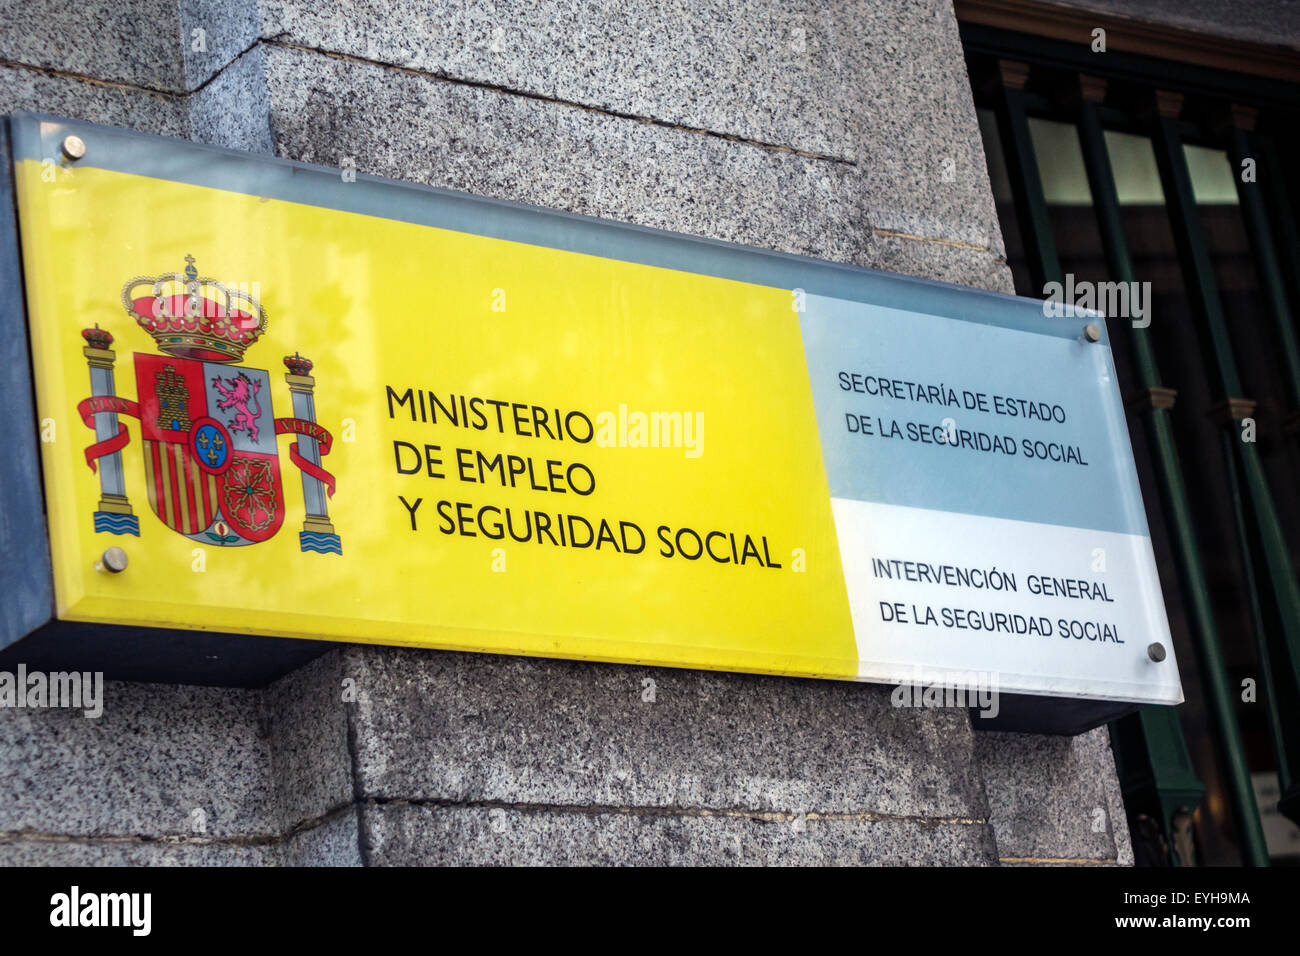 Madrid Espagne,Ministerio de Empleo y Seguridad social,Employment & social Security Ministry,Headquarters,Building sign,government,Agency,Shield,Spain15 Banque D'Images